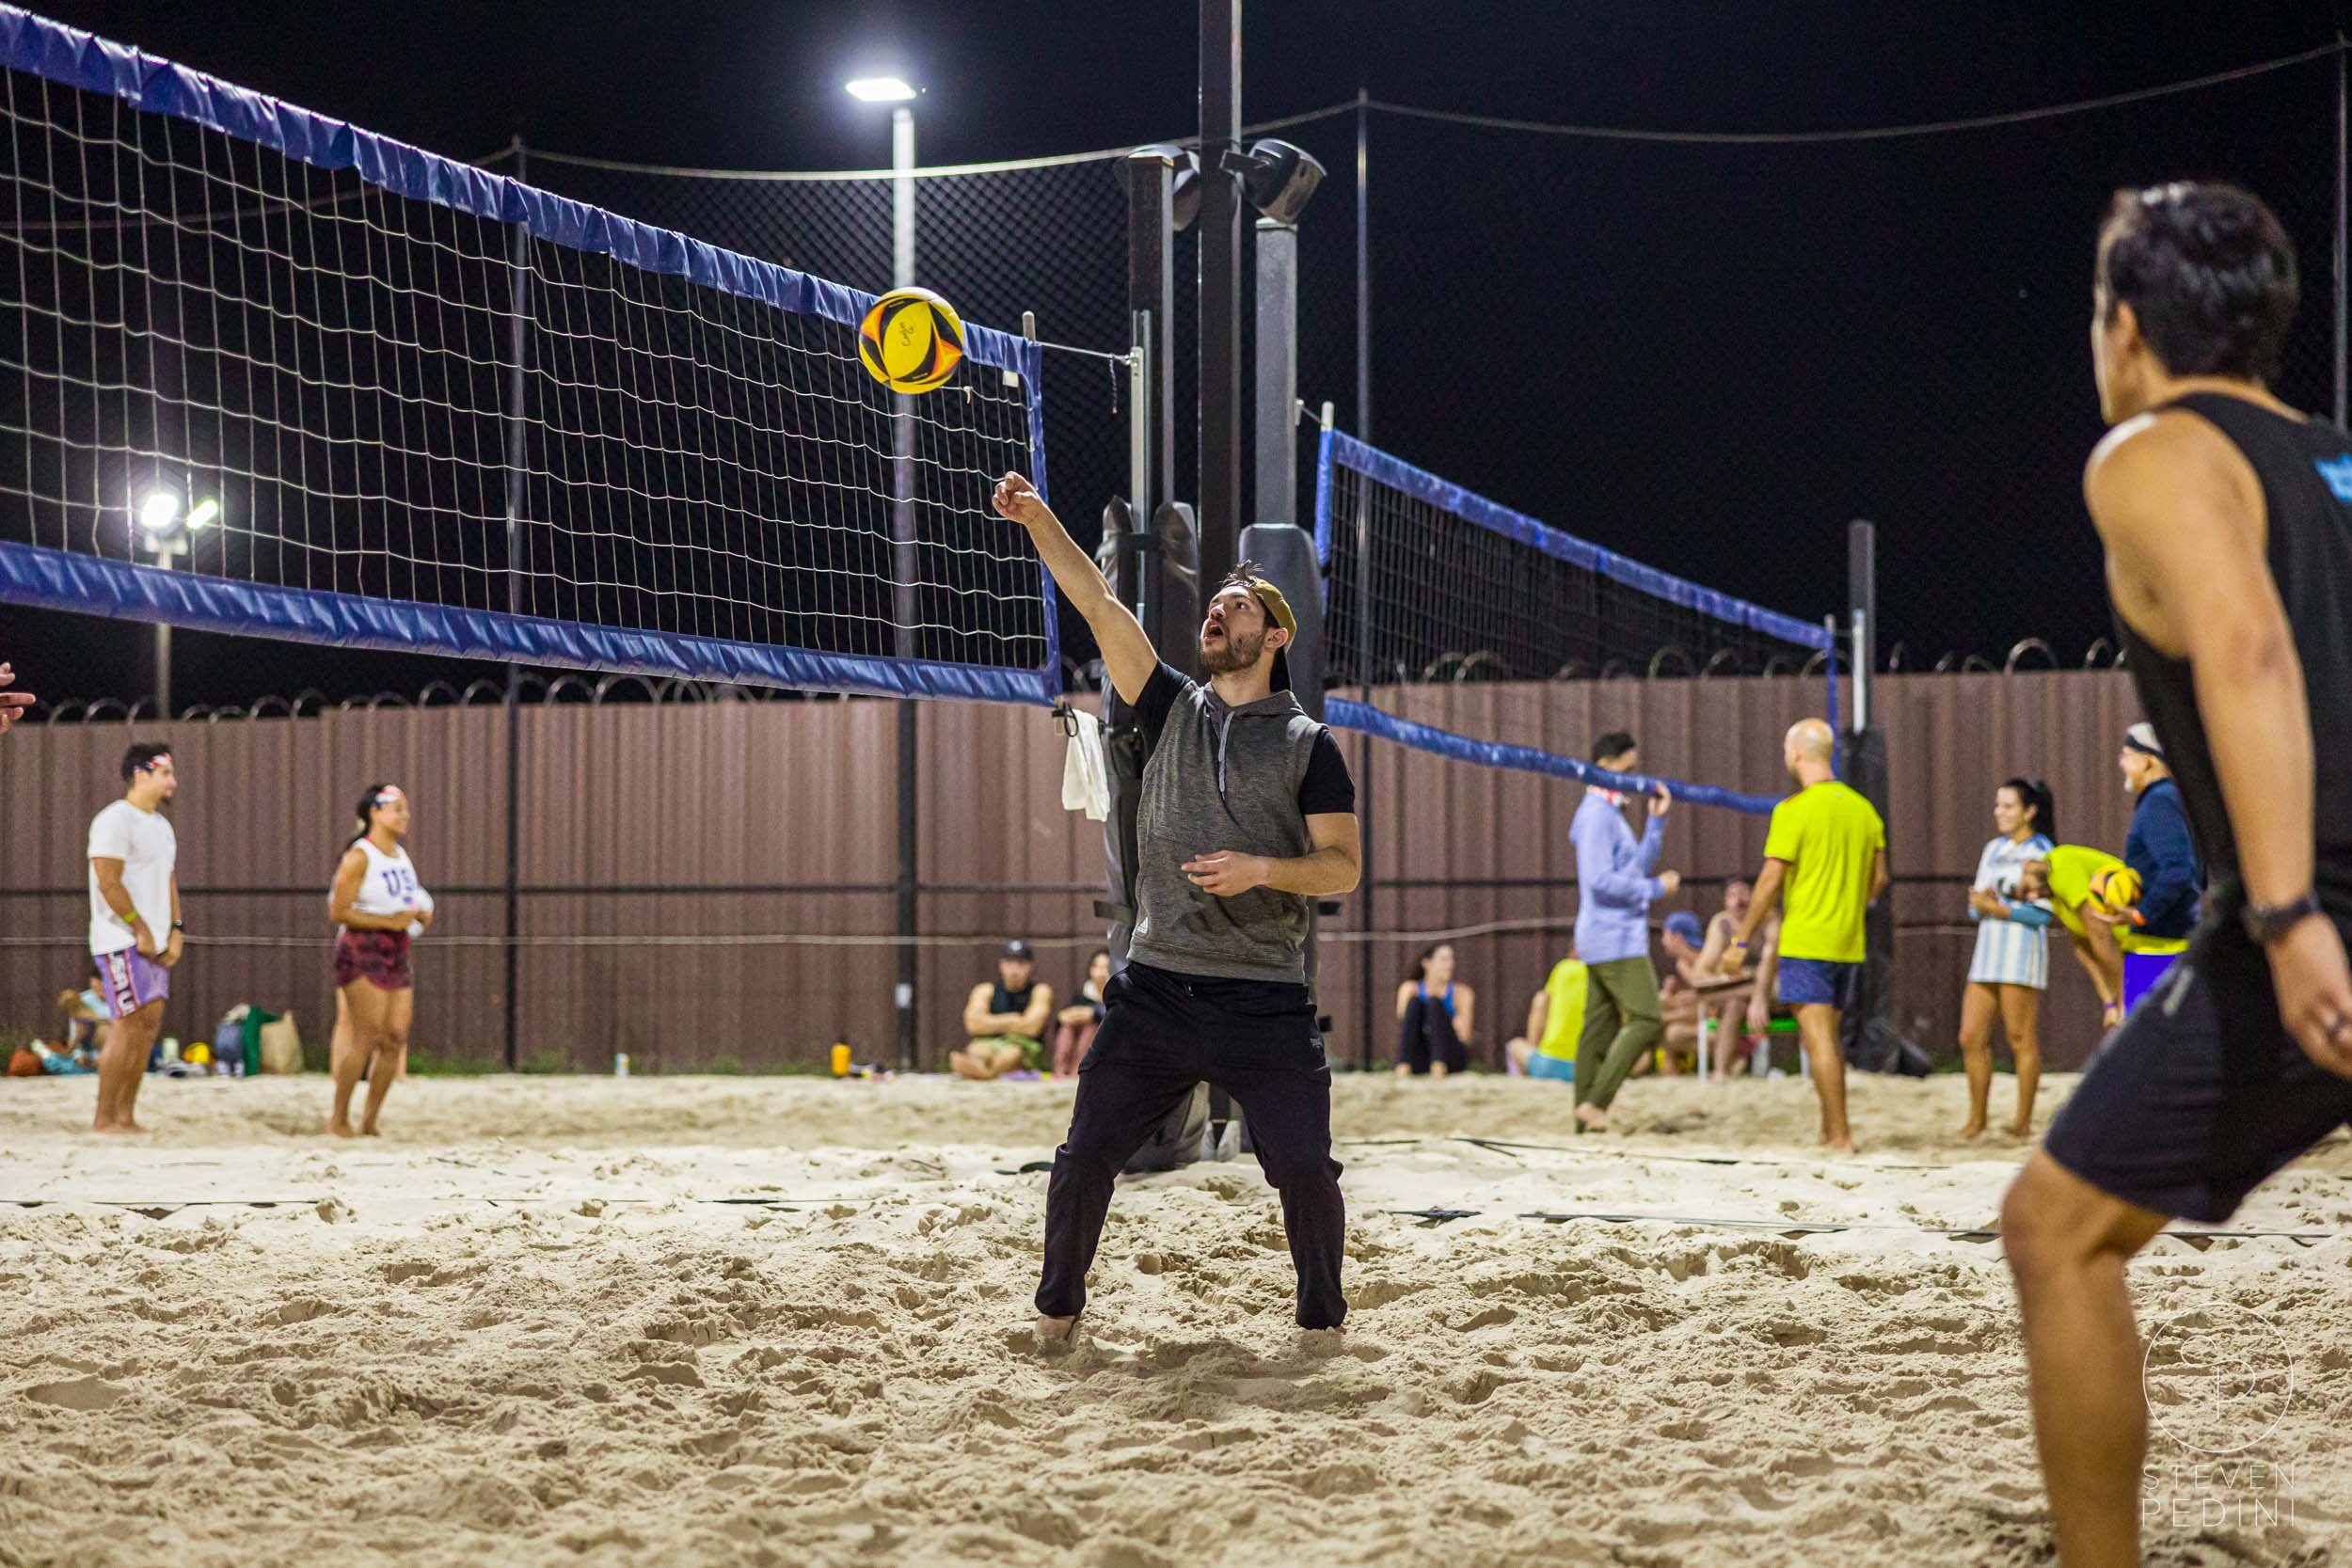 Steven Pedini Photography - Bumpy Pickle - Sand Volleyball - Houston TX - World Cup of Volleyball - 00404.jpg